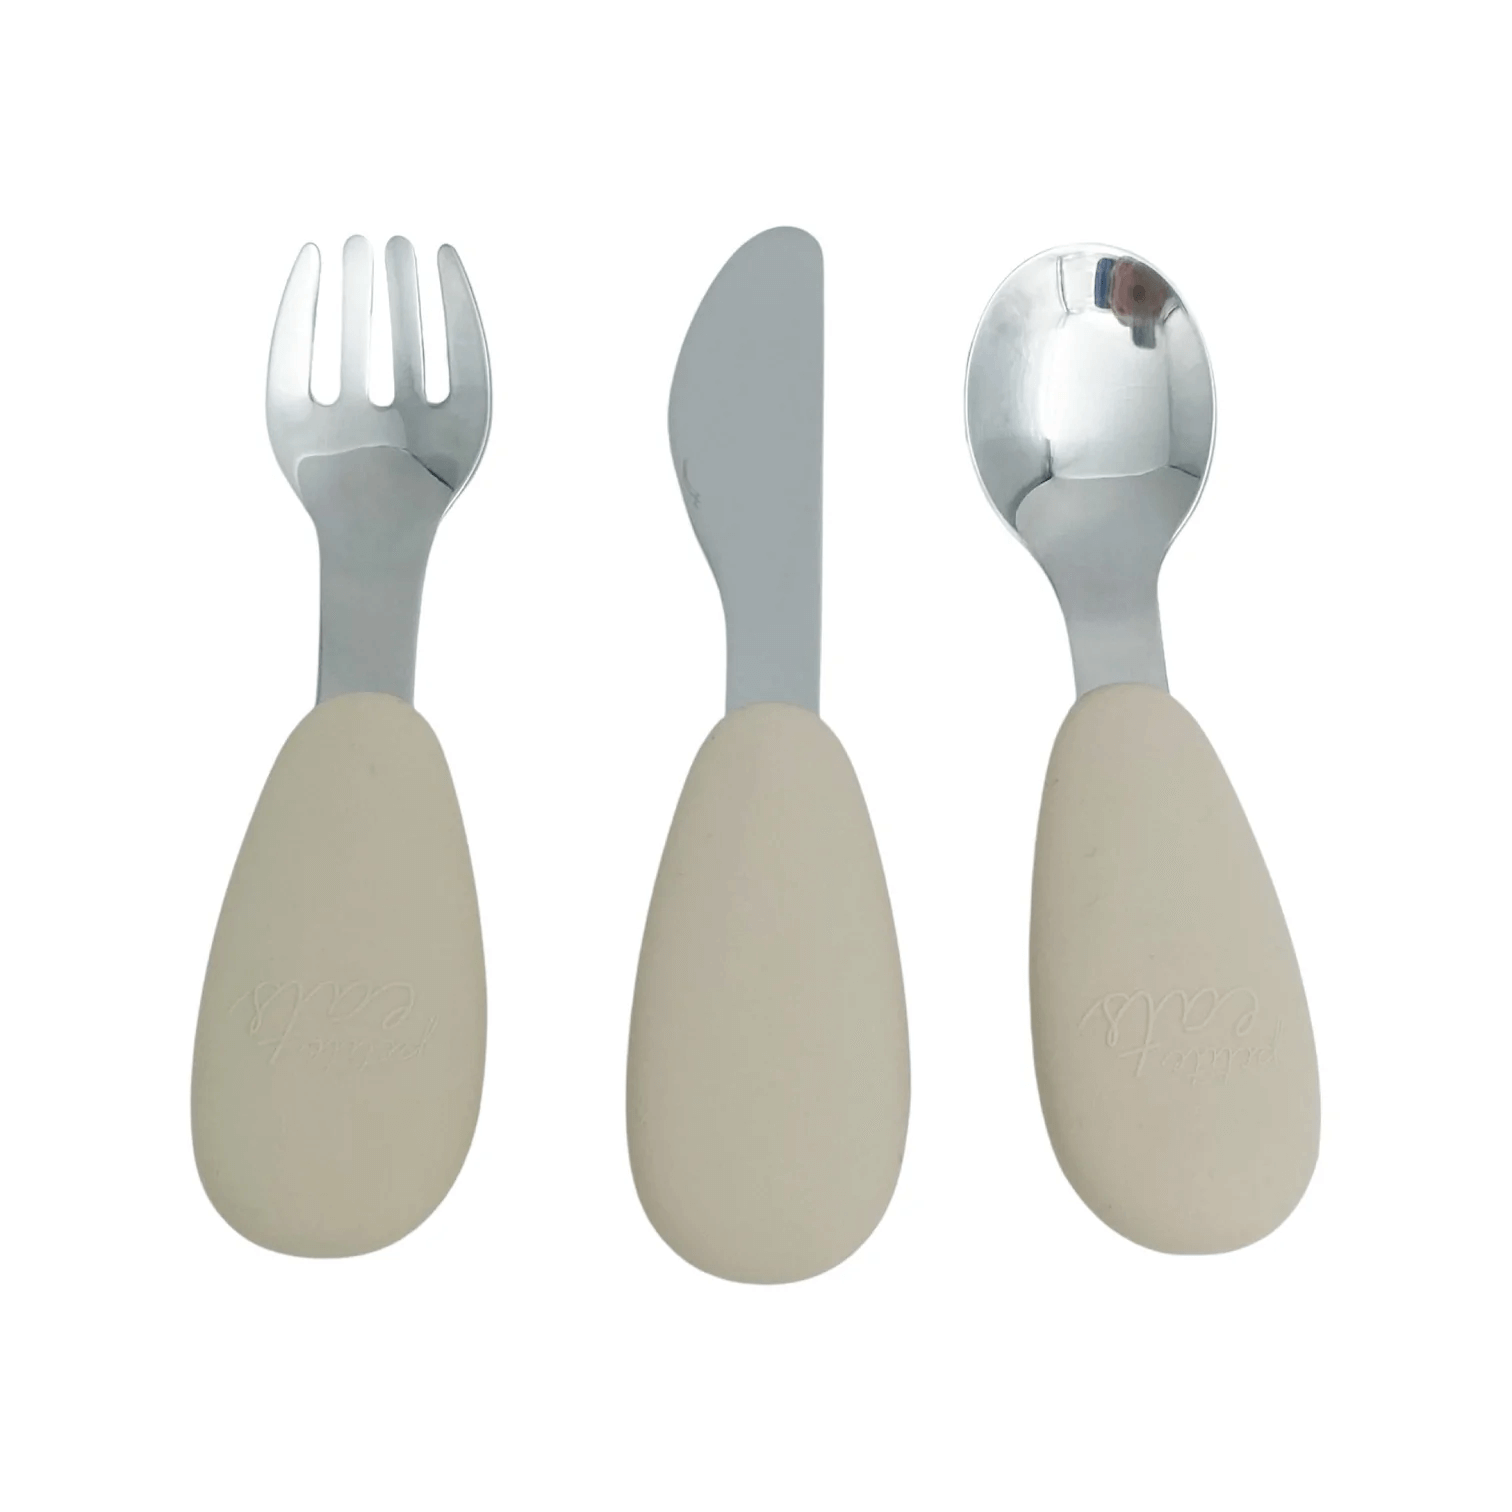 Petite Eats Full Metal Cutlery Set in Sand available at Bear & Moo